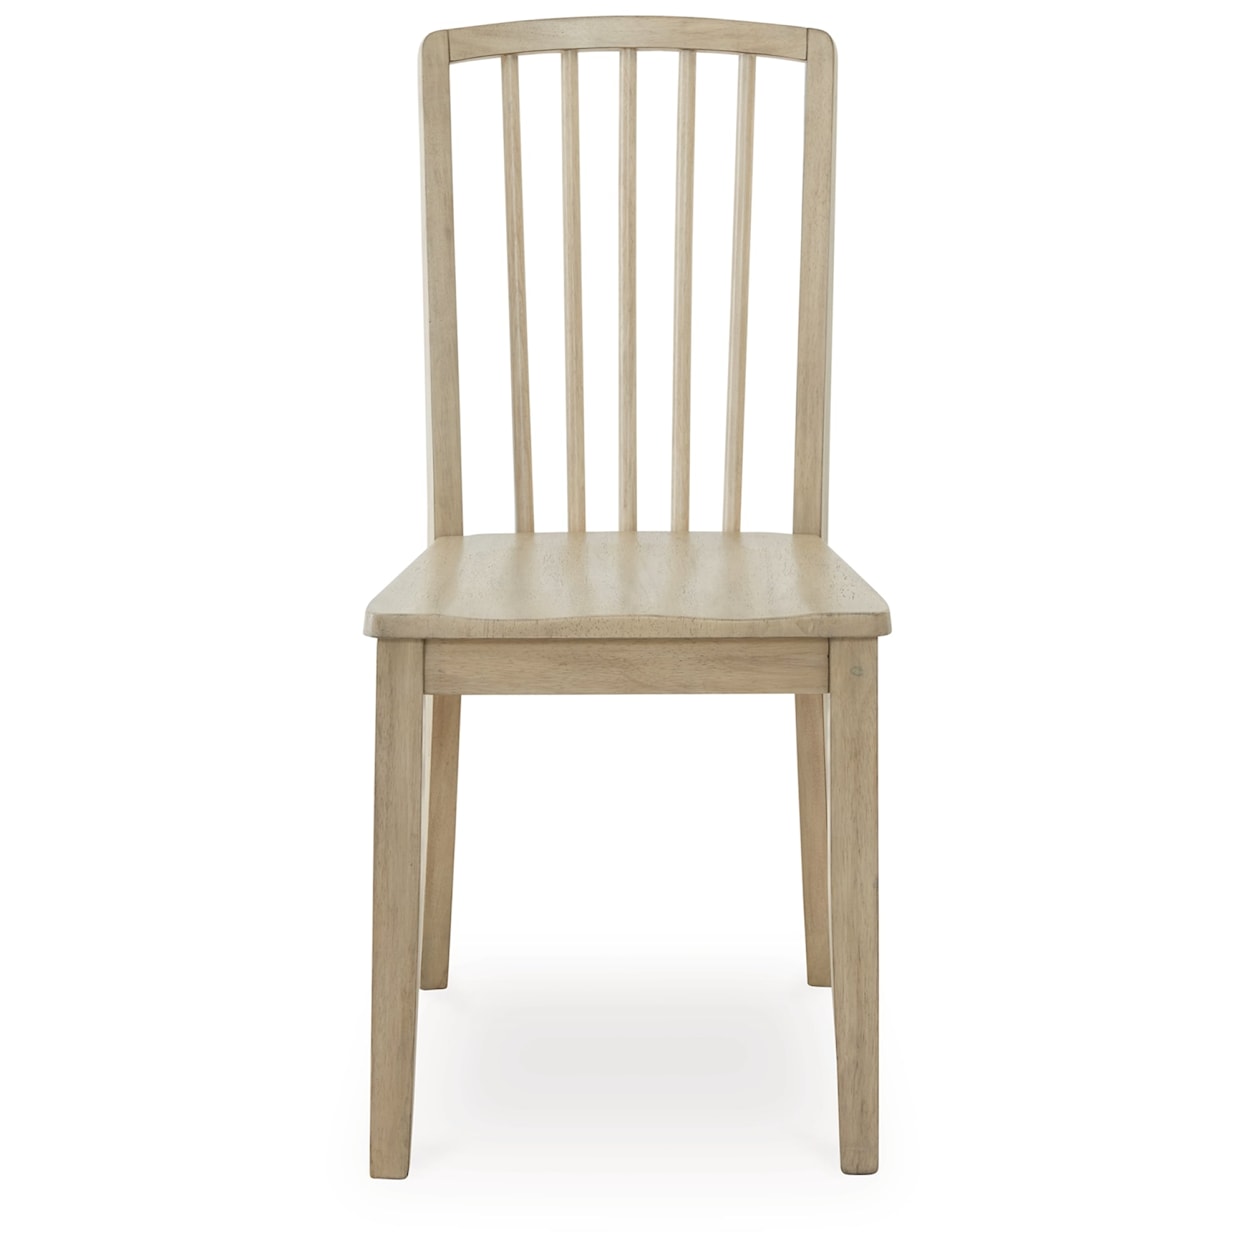 Benchcraft Gleanville Dining Chair